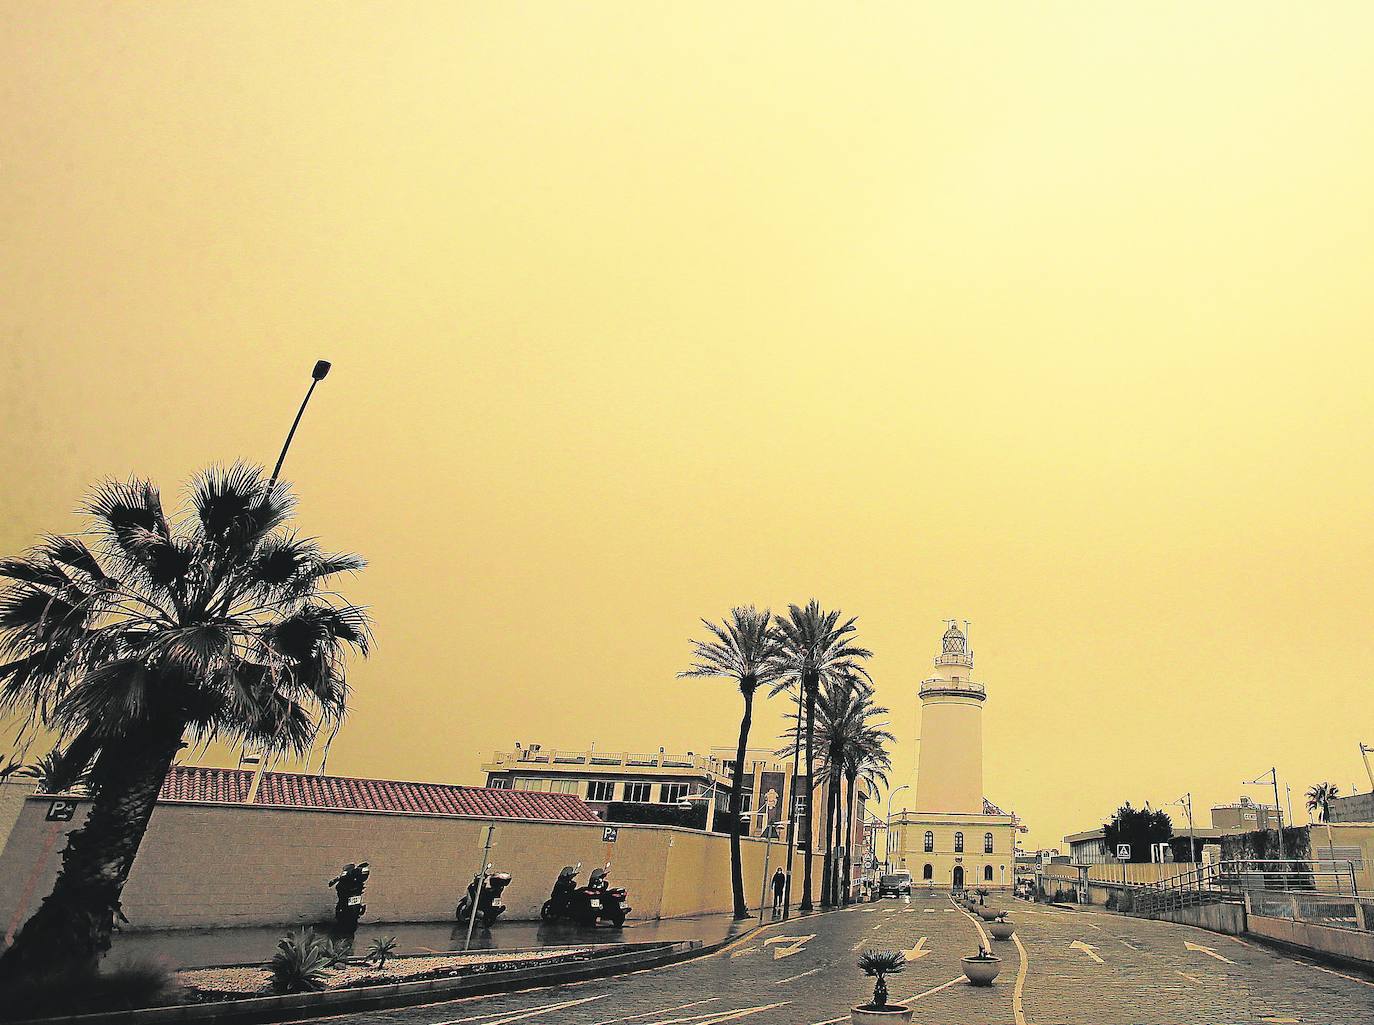 The muddy rain caused by the Sahara dust in the air created some eerie scenes. /Salvador Salas